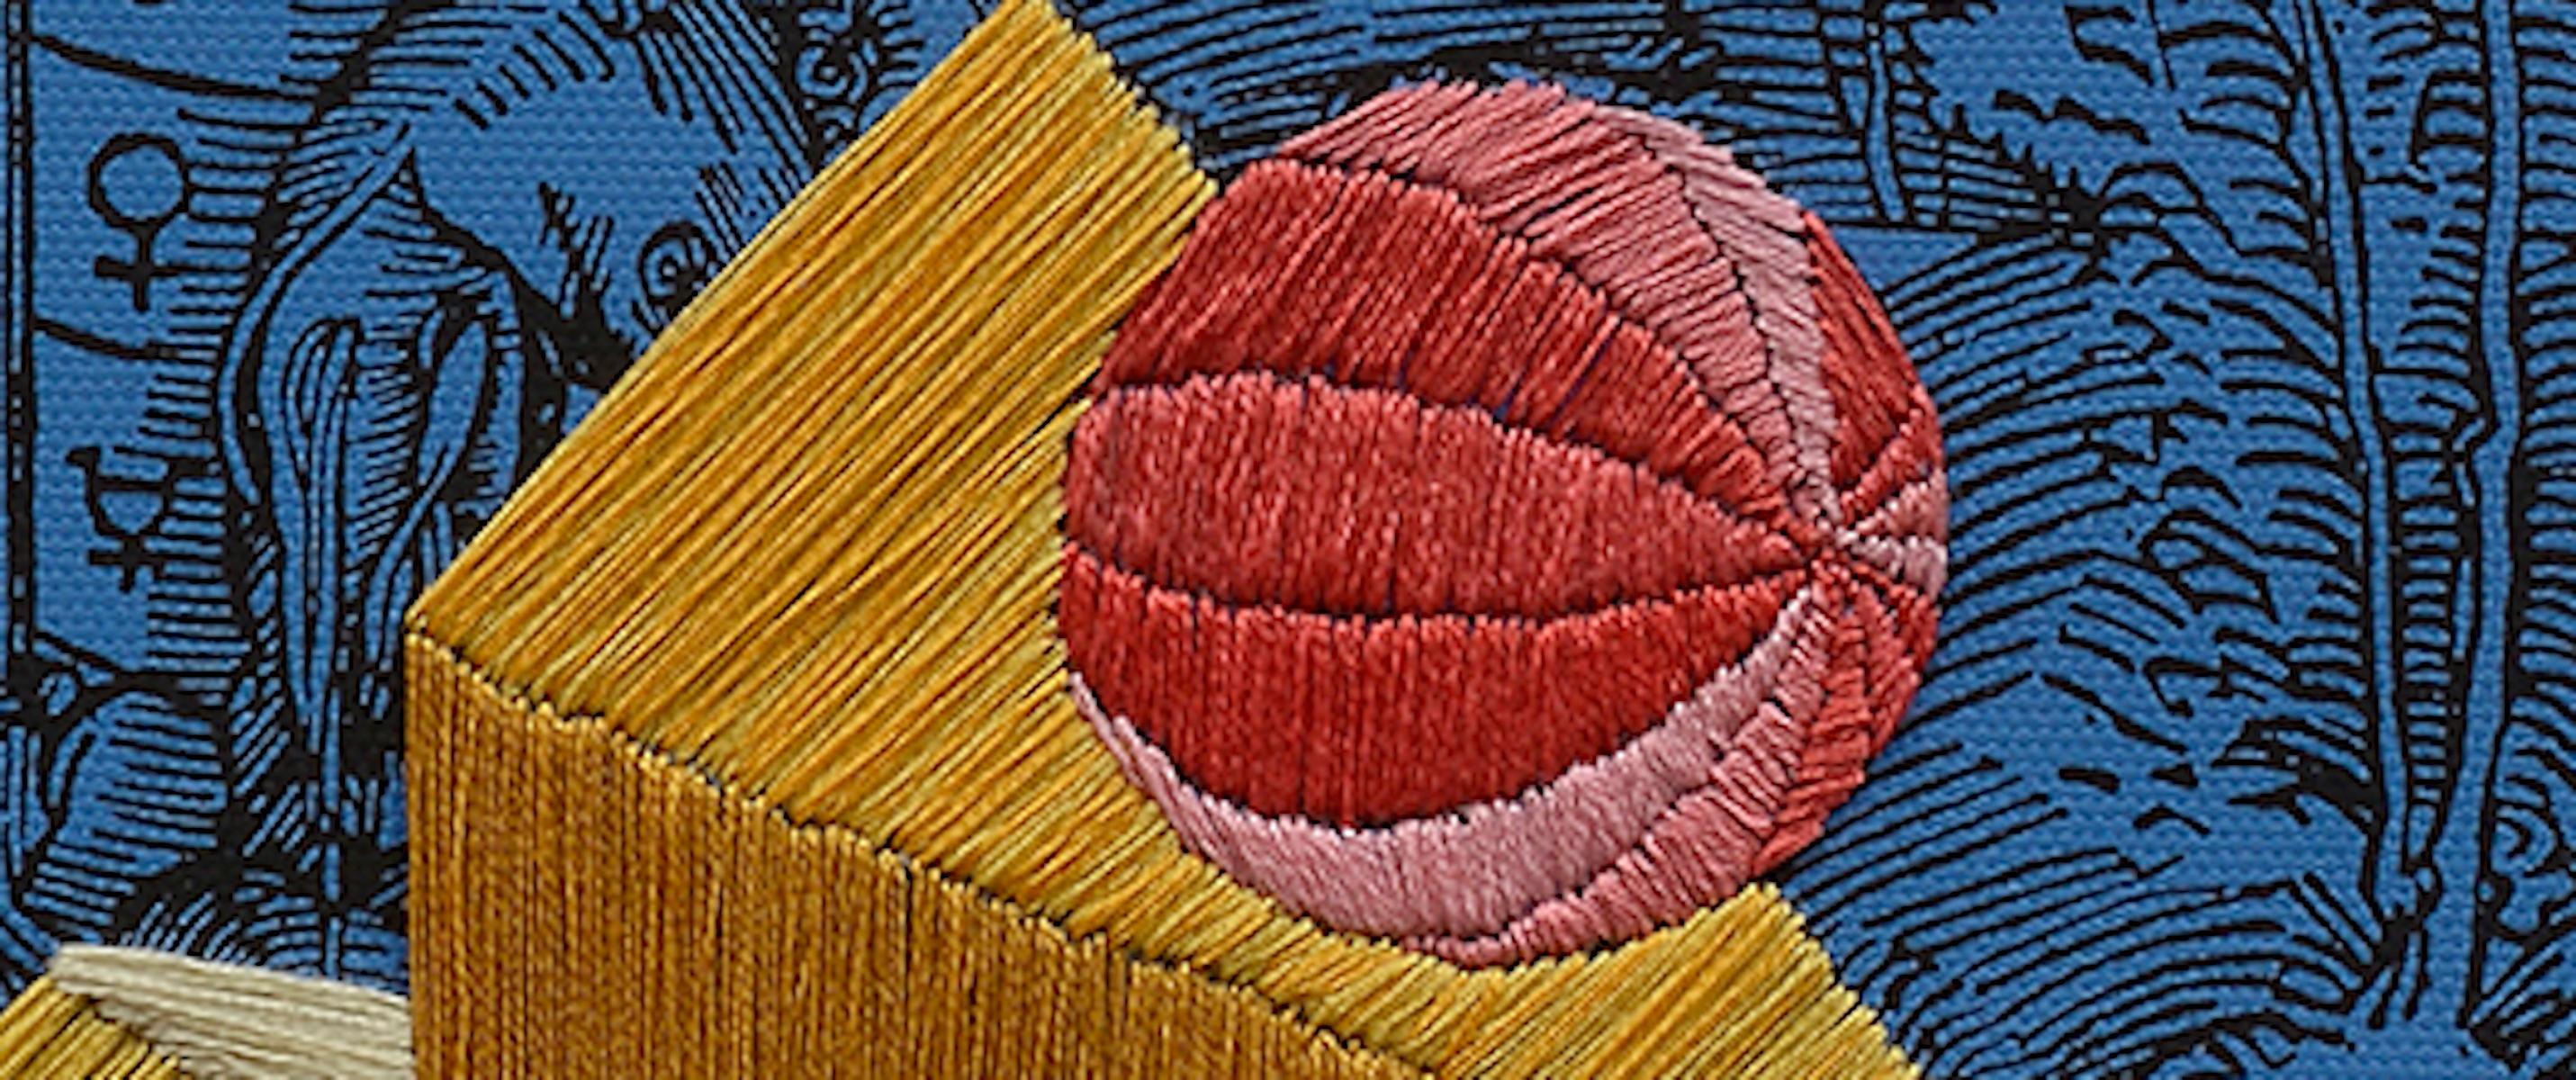 Untitled. Unique embroidery artwork from the Durero series  - Contemporary Art by Ana Seggiaro